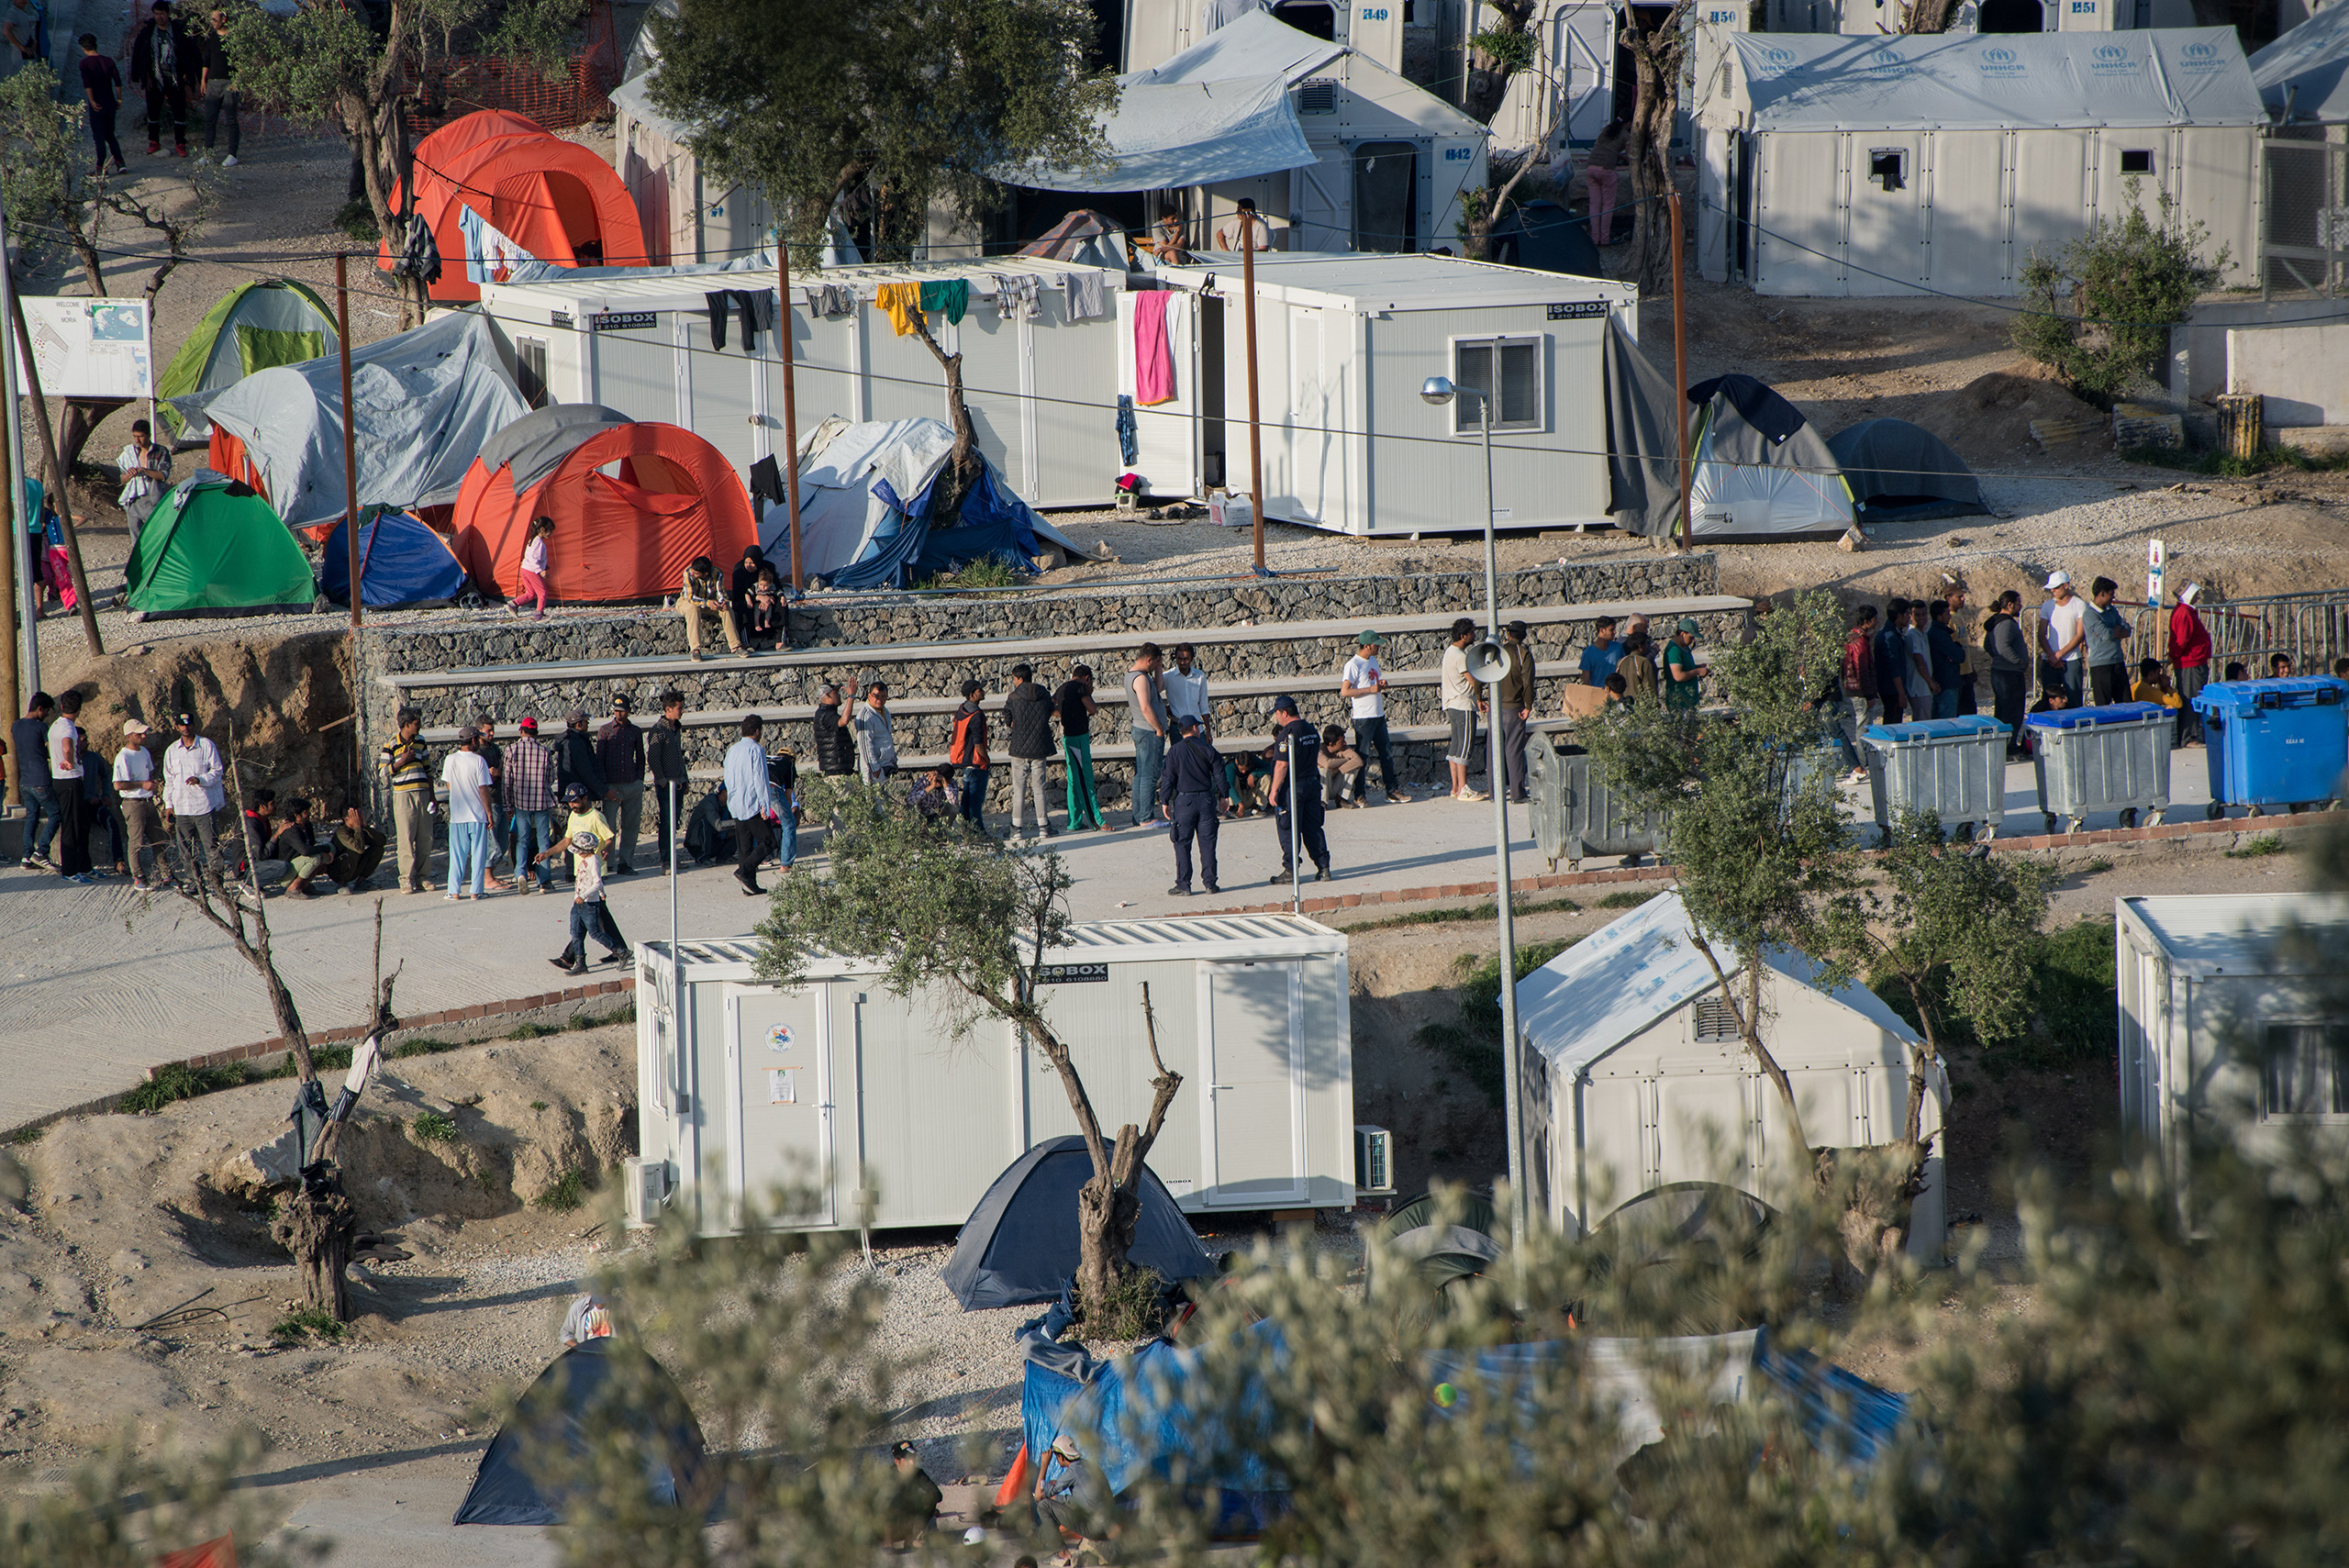 People wait in line at the Moria camp for migrants and refugees located in Mytilene, on the Greek island of Lesbos, April 13, 2016. Pope Francis will visit the island on April 15. (Guillaume Pinon—NurPhoto/Sipa USA)